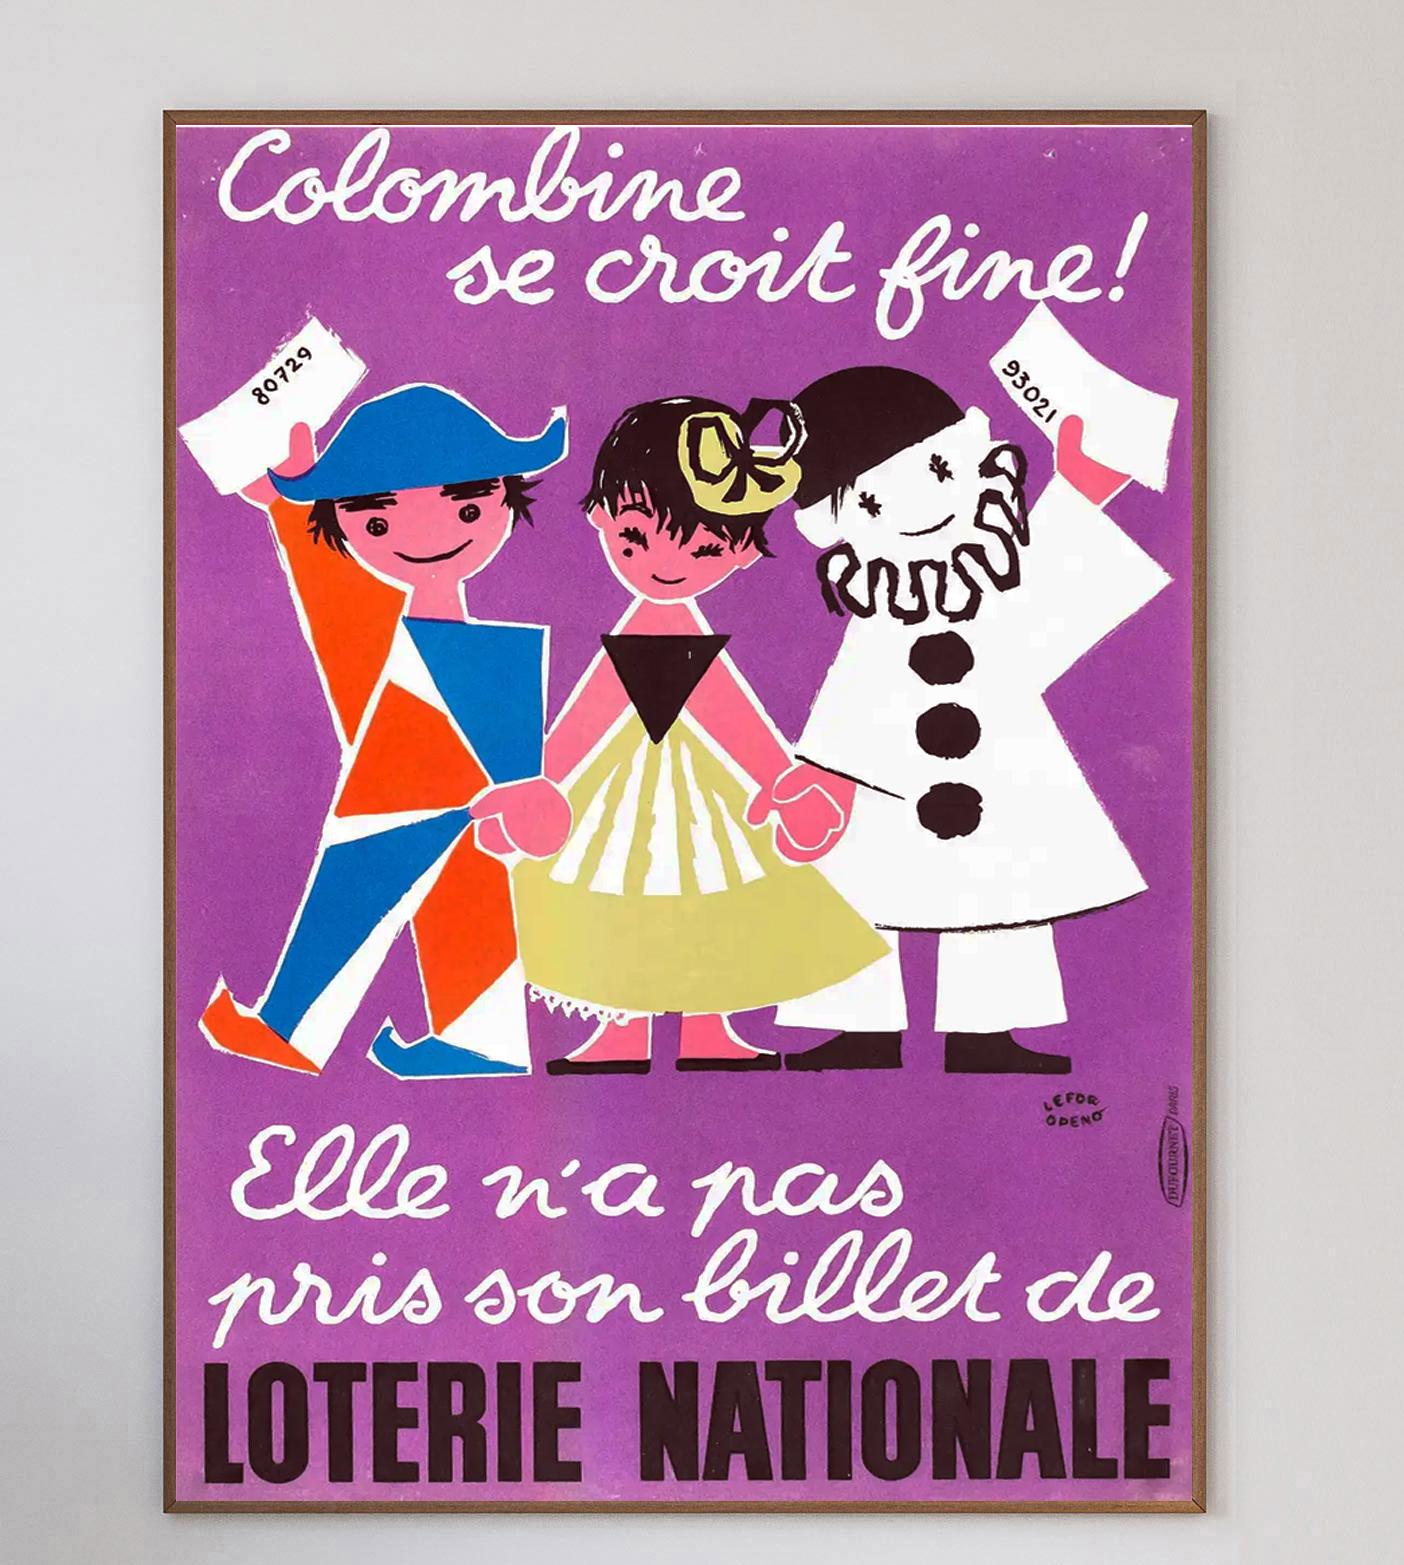 This beautiful and colourful poster is from 1957 advertising the Loterie Nationale or French National Lottery. Reading 